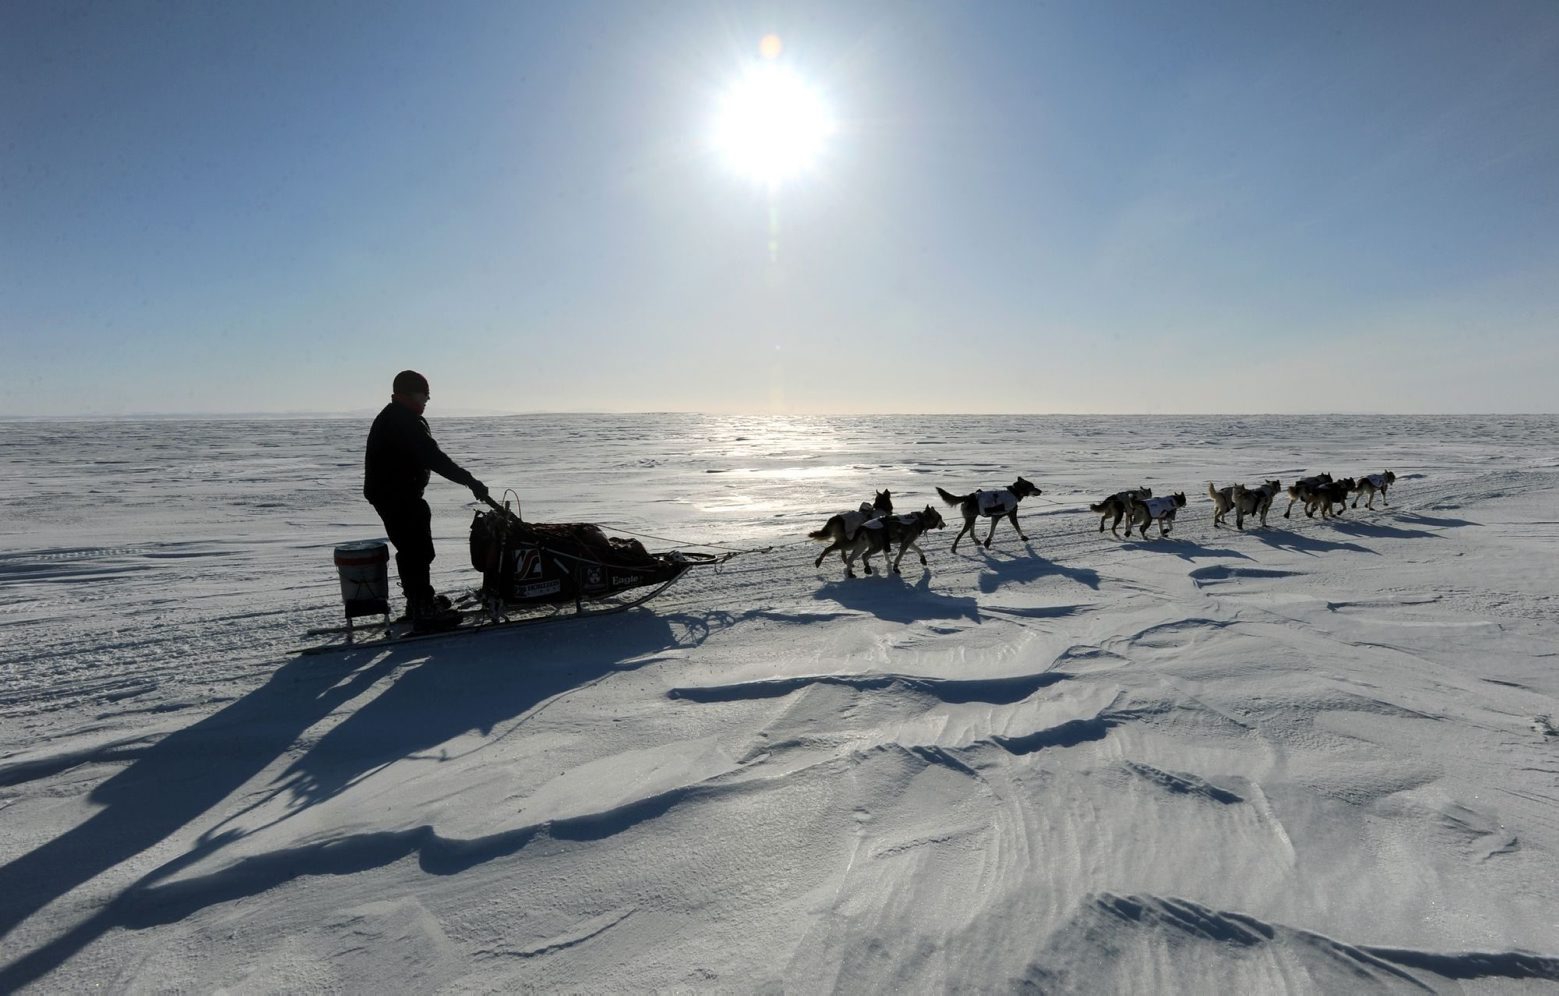 File - In this March 11, 2013 file photo, Aily Zirkle drives her dog team towards Elim after leaving the checkpoint at Koyuk in Alaska during the Iditarod Trail Sled Dog Race. The Iditarod Trail Sled Dog Race will again have a national presence after race organizers have signed a deal with the Sportsman Channel. The outdoor network and its affiliated websites and magazines will promote the race, and the channel will air specials about the world's longest sled dog race ahead of the March 1 start in Alaska. (AP Photo/The Anchorage Daily News, Bill Roth, File) IDITAROD NETWORK DEAL